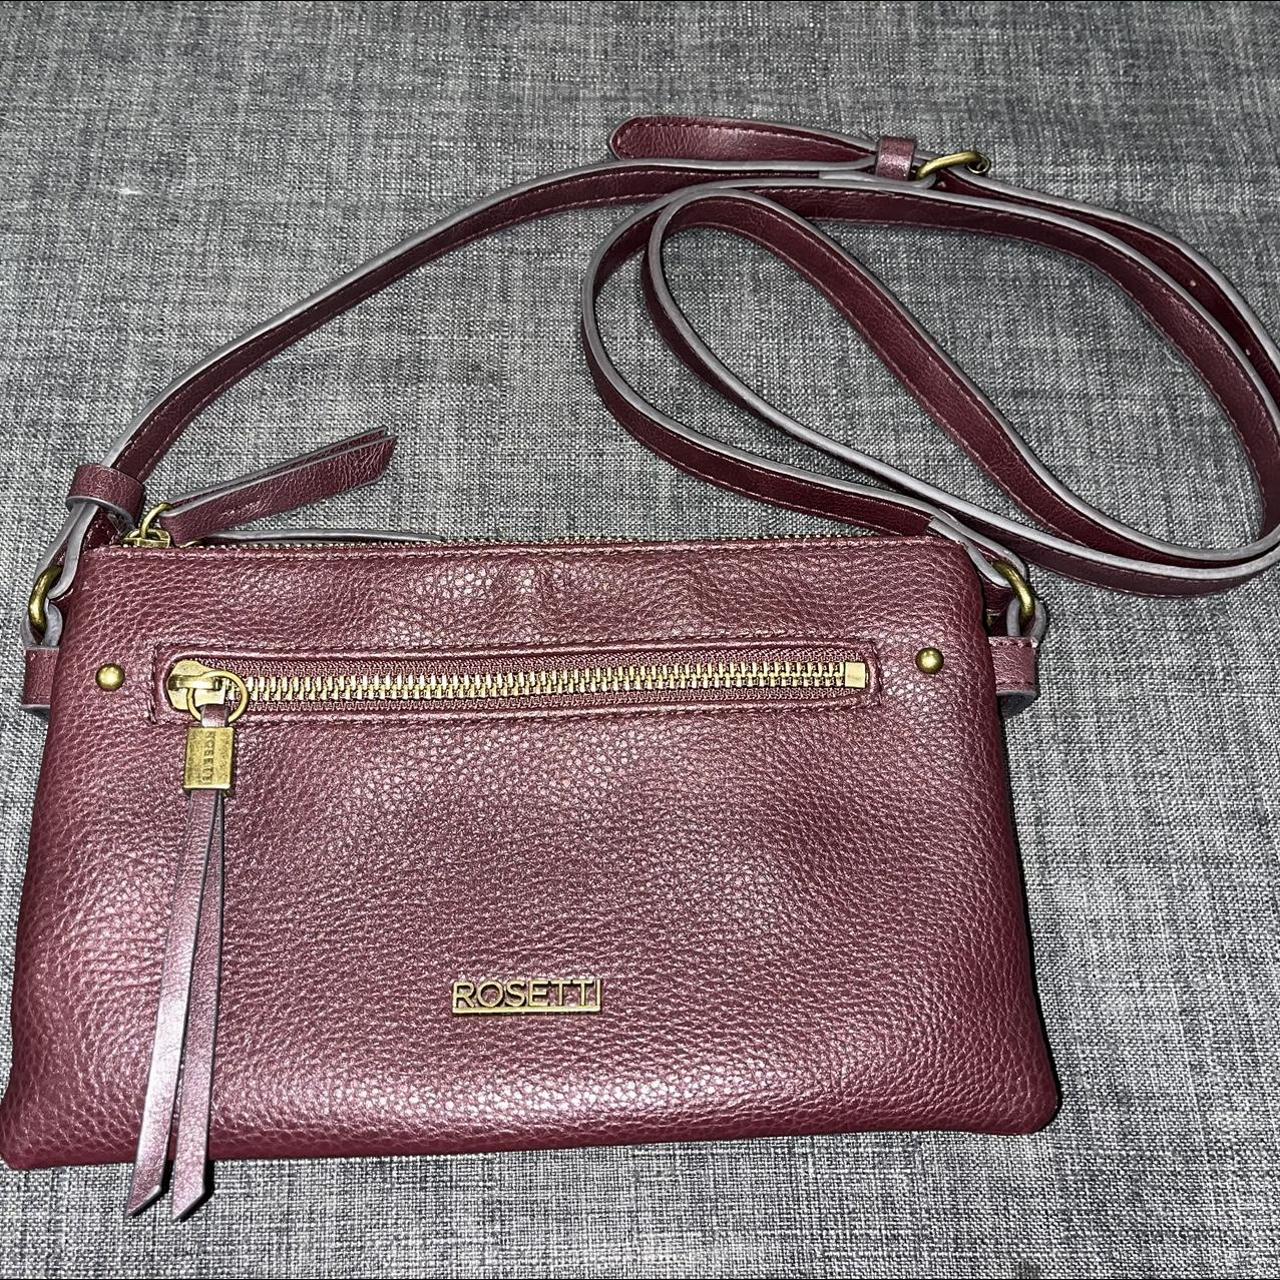 Buy S-ZONE Women's Cowhide Genuine Leather Small Purse Handbag Crossbody  Shoulder Bag Upgraded Version (Burgundy) at Amazon.in